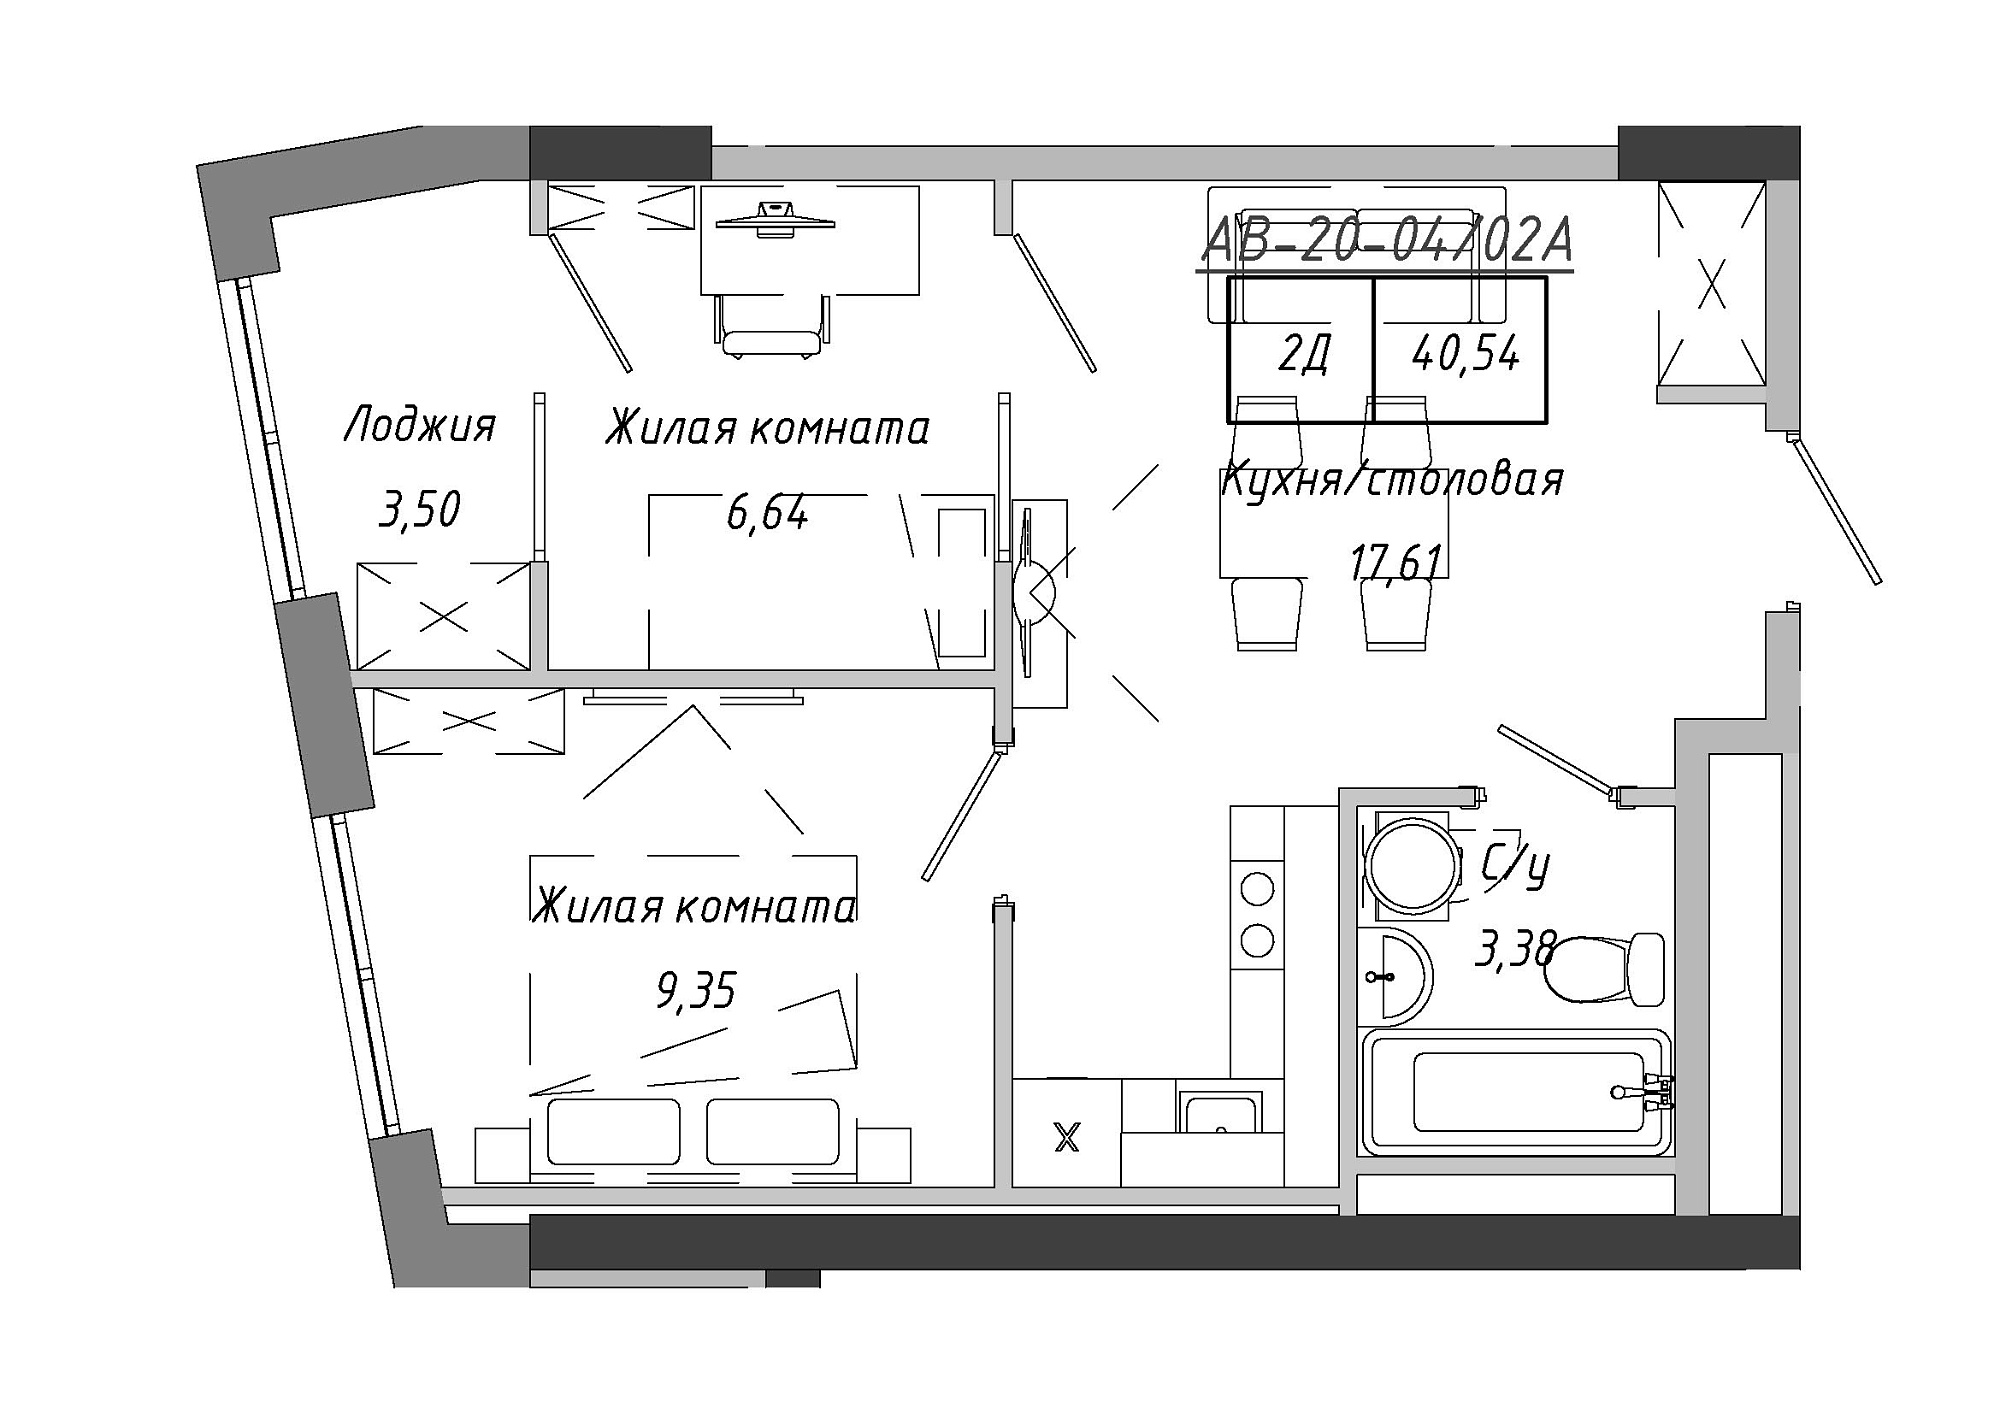 Planning 2-rm flats area 40.54m2, AB-20-04/0002а.